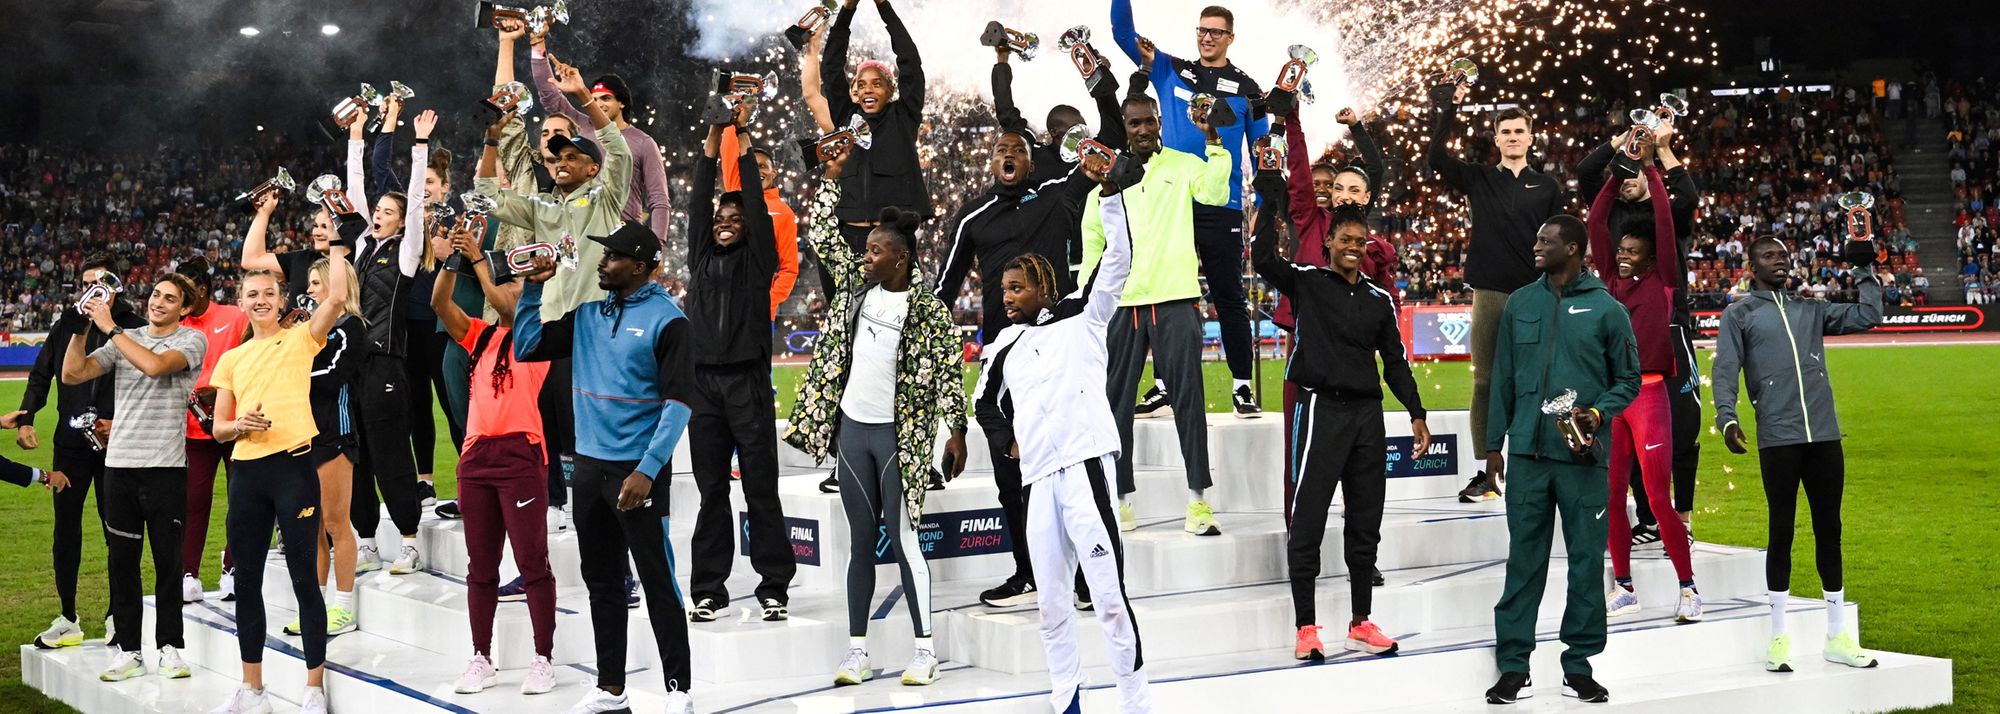 The Wanda Diamond League will break new ground in 2023, with a provisional calendar that includes 15 host cities across 12 countries and four continents